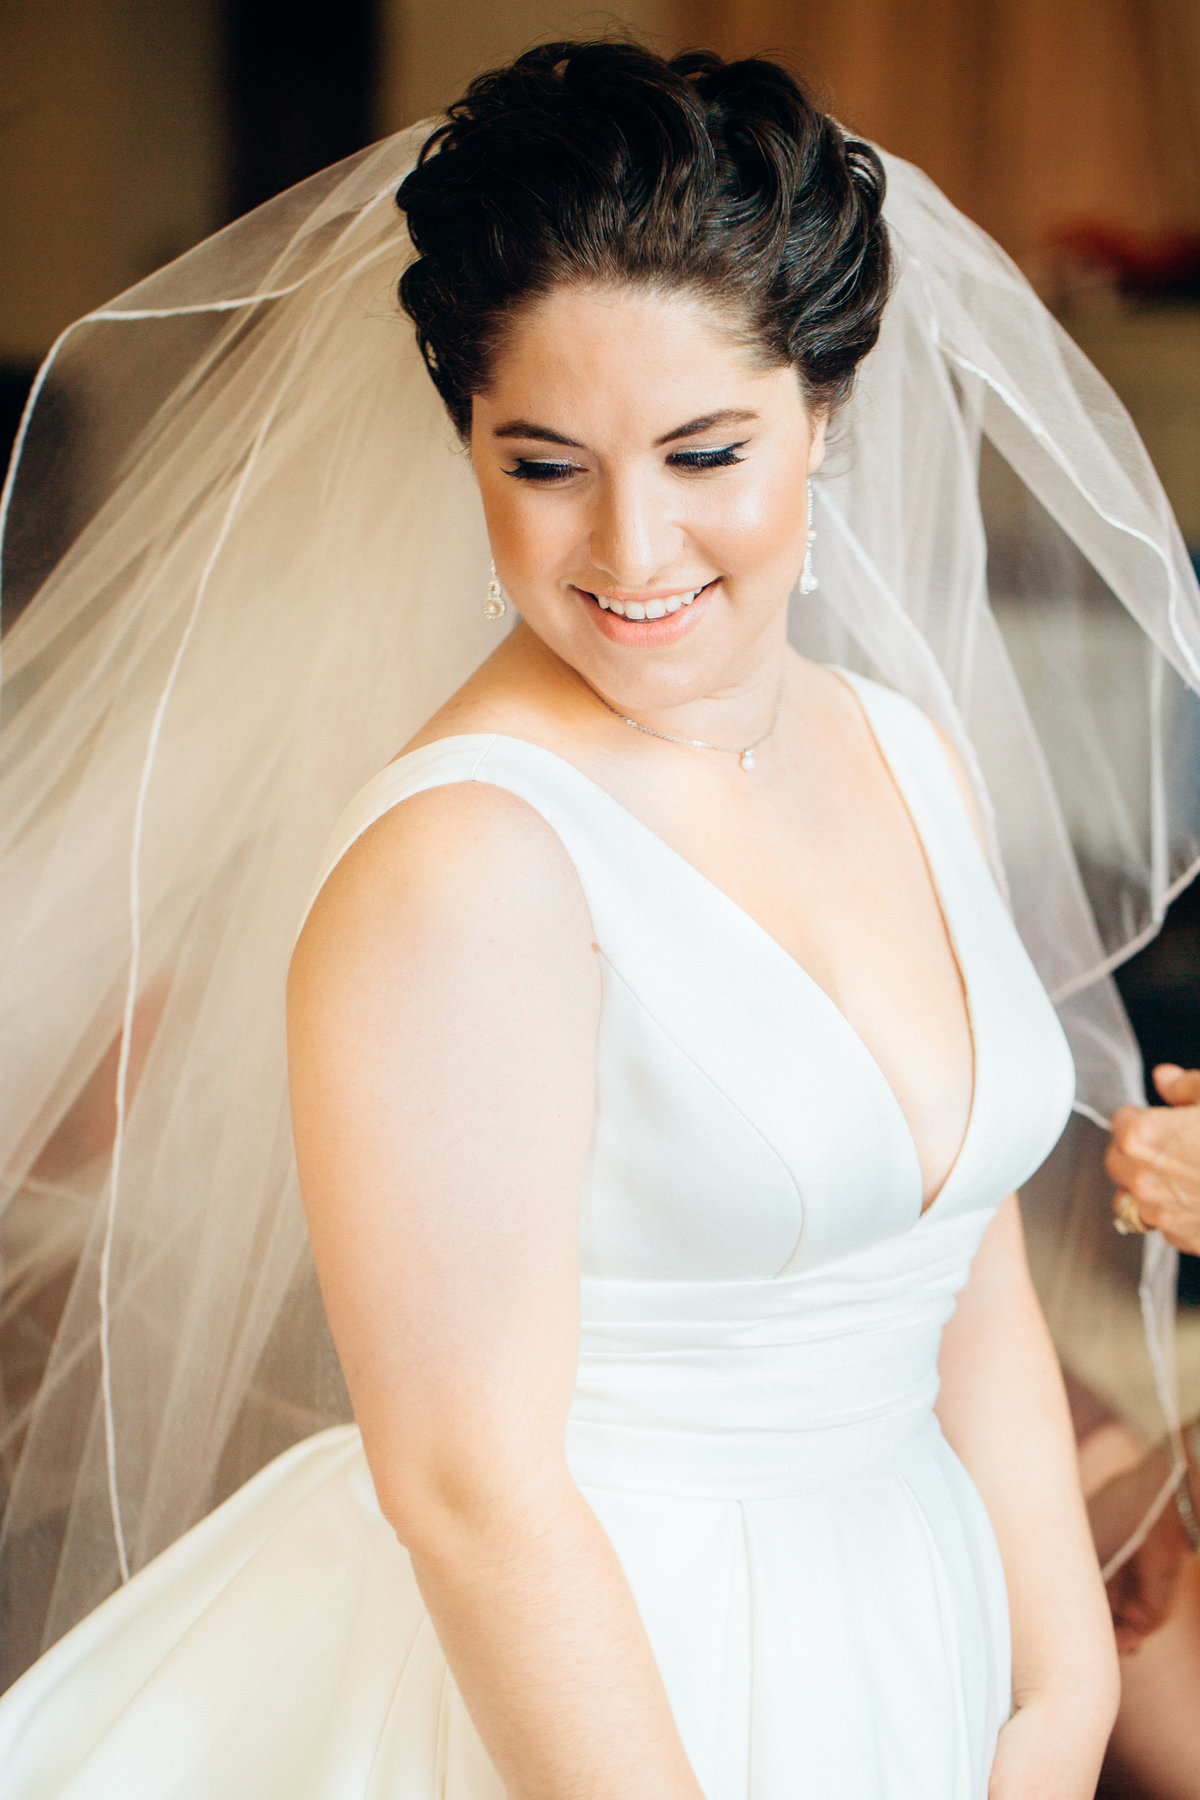 Woman In Wedding Dress Smiling Photography